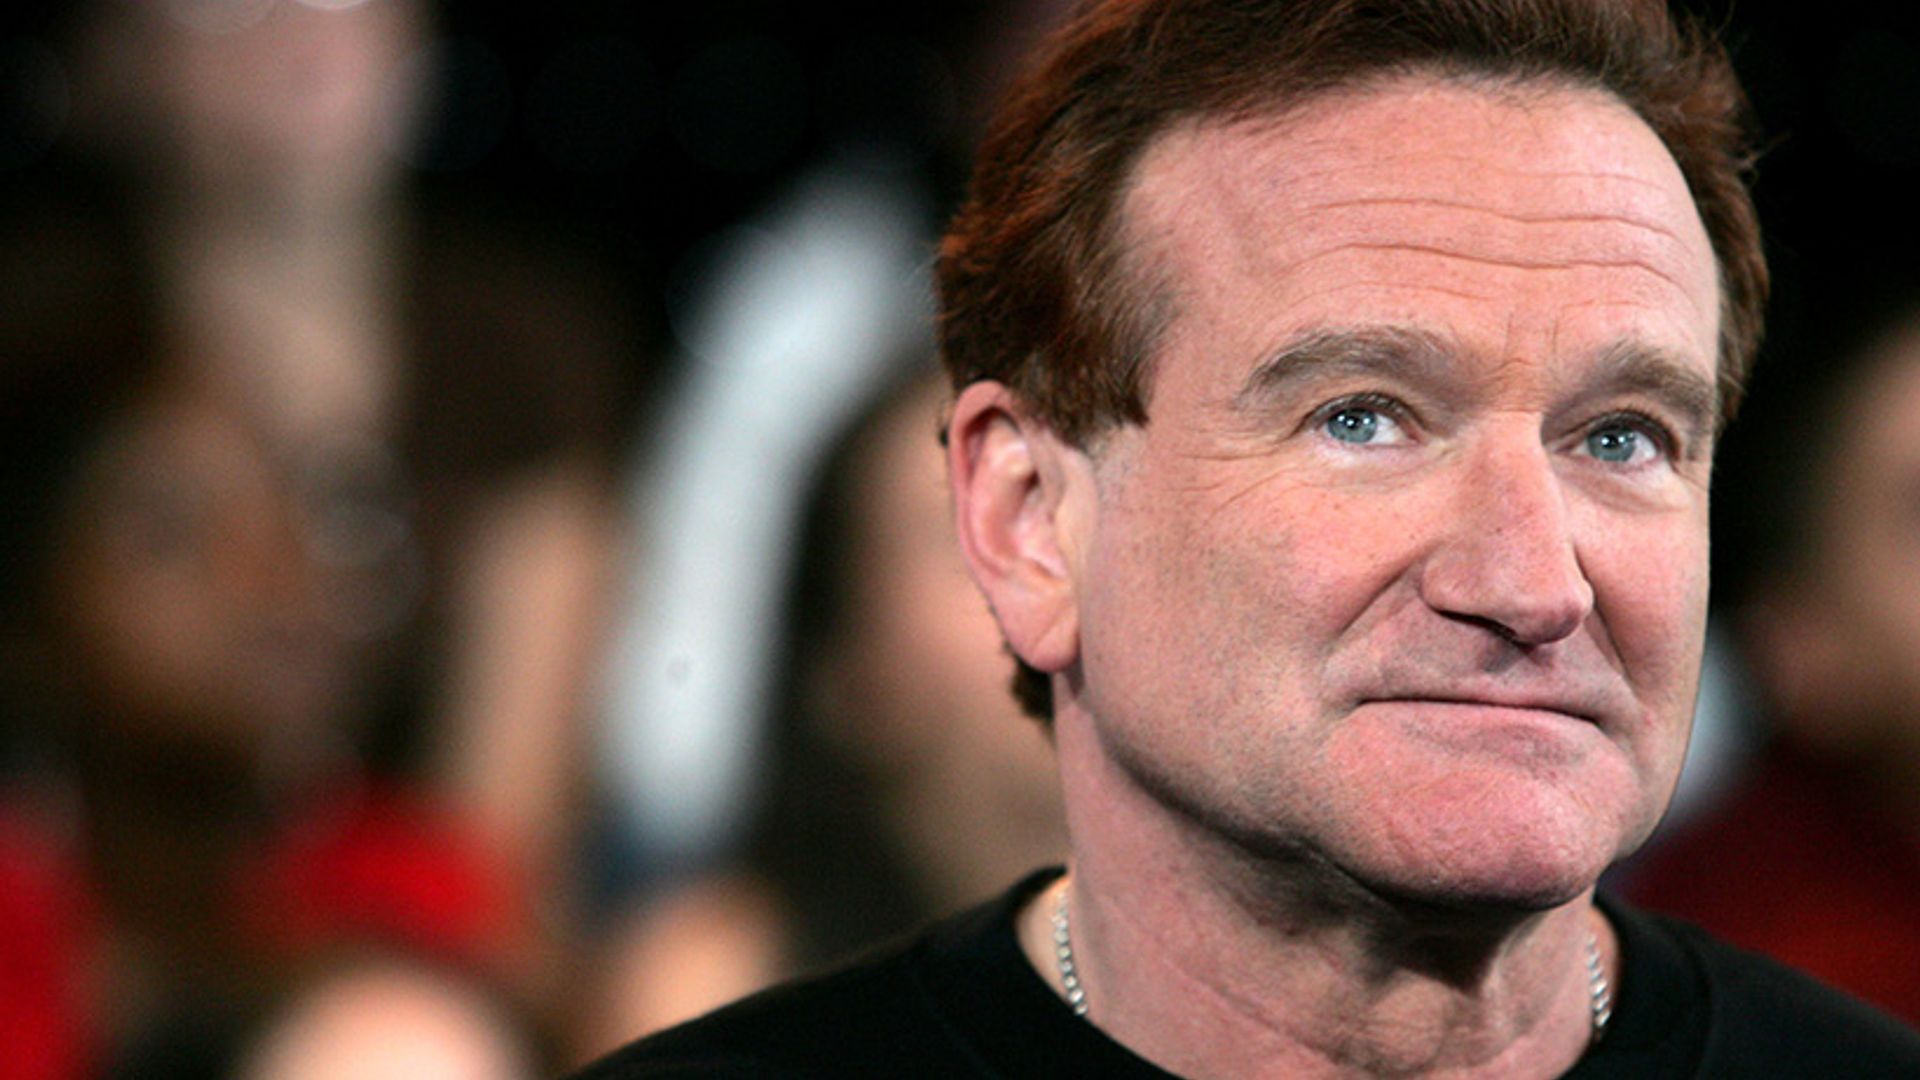 Robin Williams makeup artist recalls star's final weeks: 'He was sobbing in my arms at the end of every day'